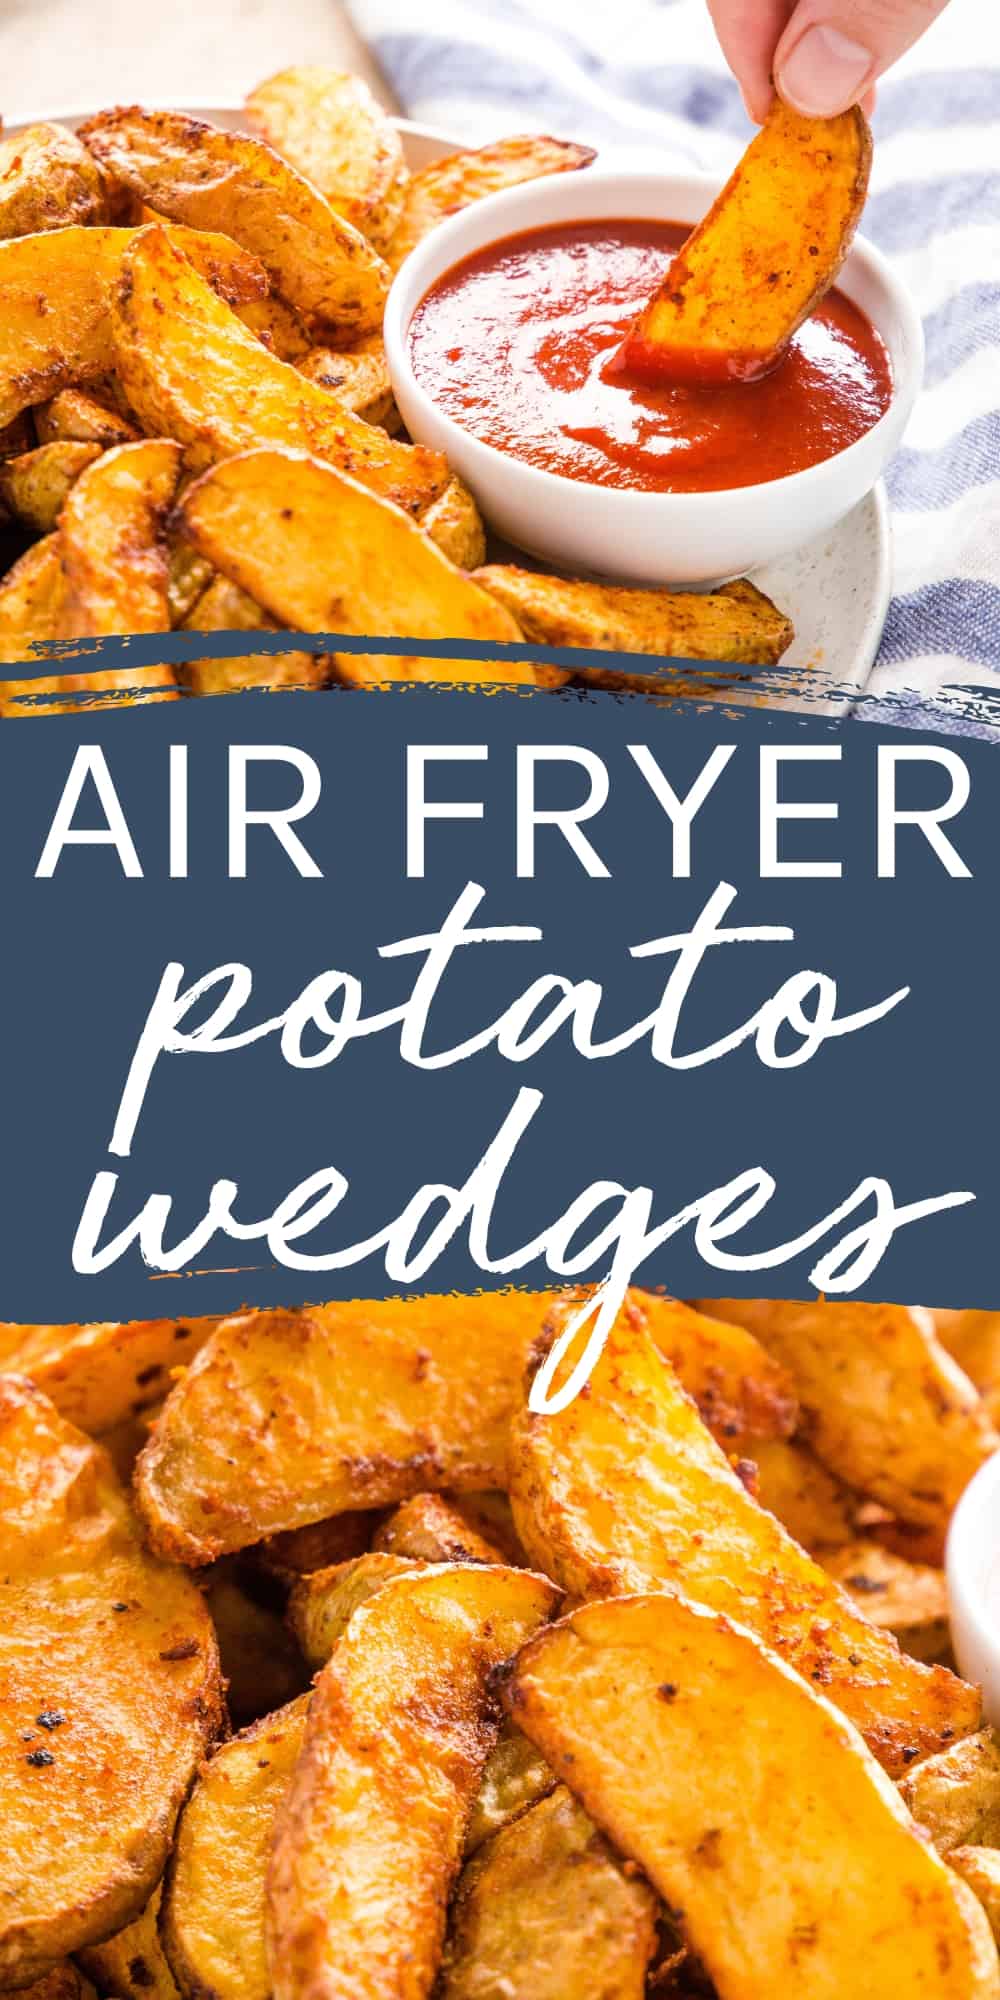 These Air Fryer Potato Wedges are the perfect easy-to-make side dish - crispy on the outside, fluffy on the inside, perfectly seasoned, and ready in 20 minutes! Recipe from thebusybaker.ca! #airfryerpotatowedges #potatowedges #fries #homemadefrenchfries #potatoes #sidedish #airfryer #crispypotatoes via @busybakerblog